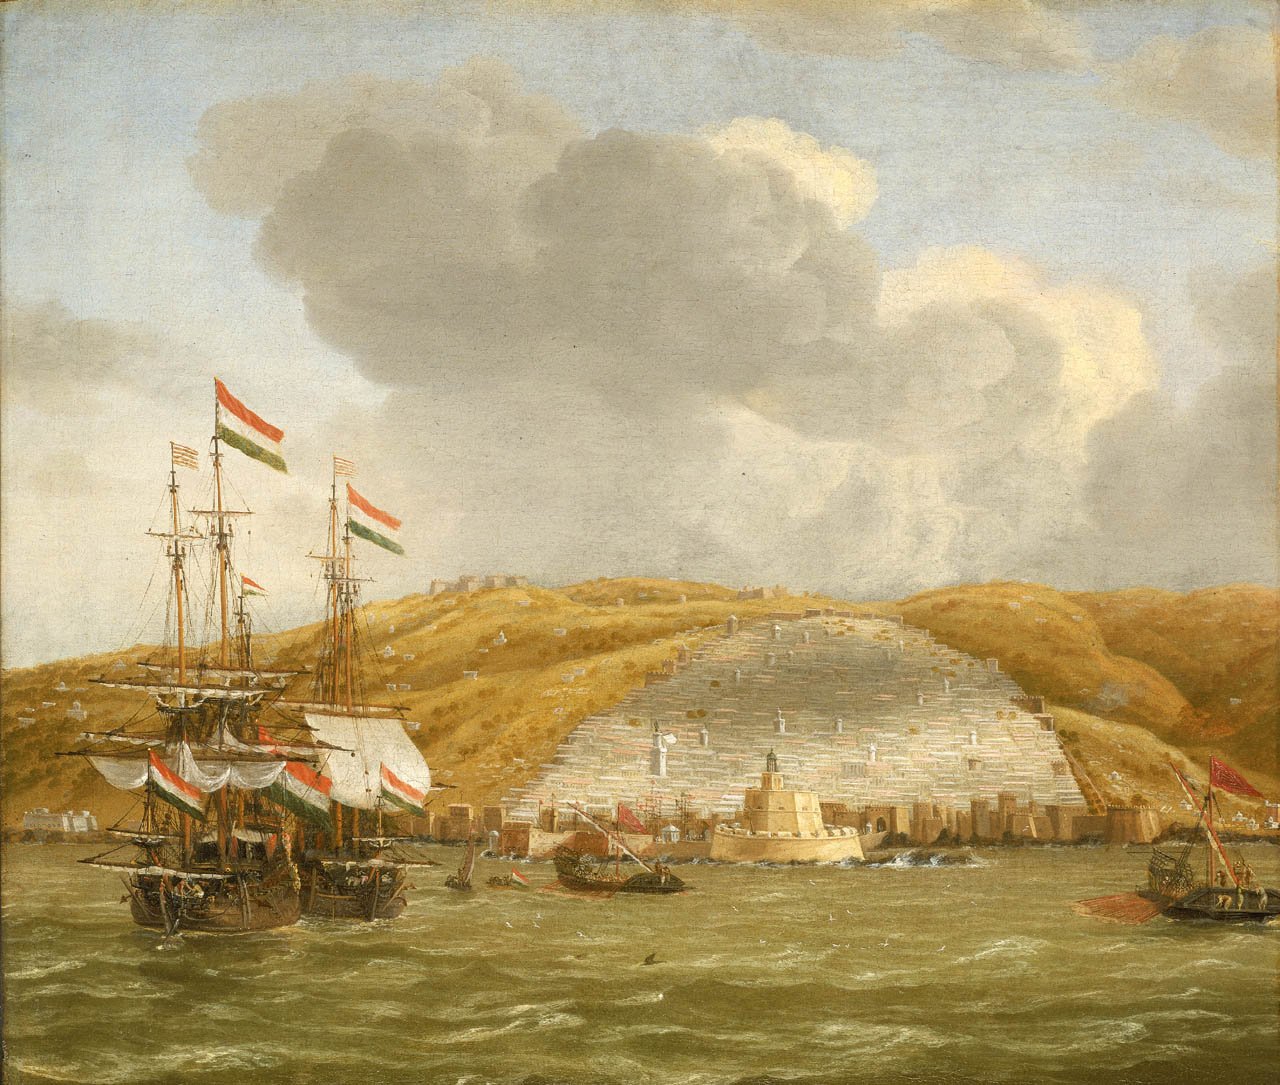 http://upload.wikimedia.org/wikipedia/commons/8/8c/Reinier_Nooms_-_Shipping_off_Algiers.jpg